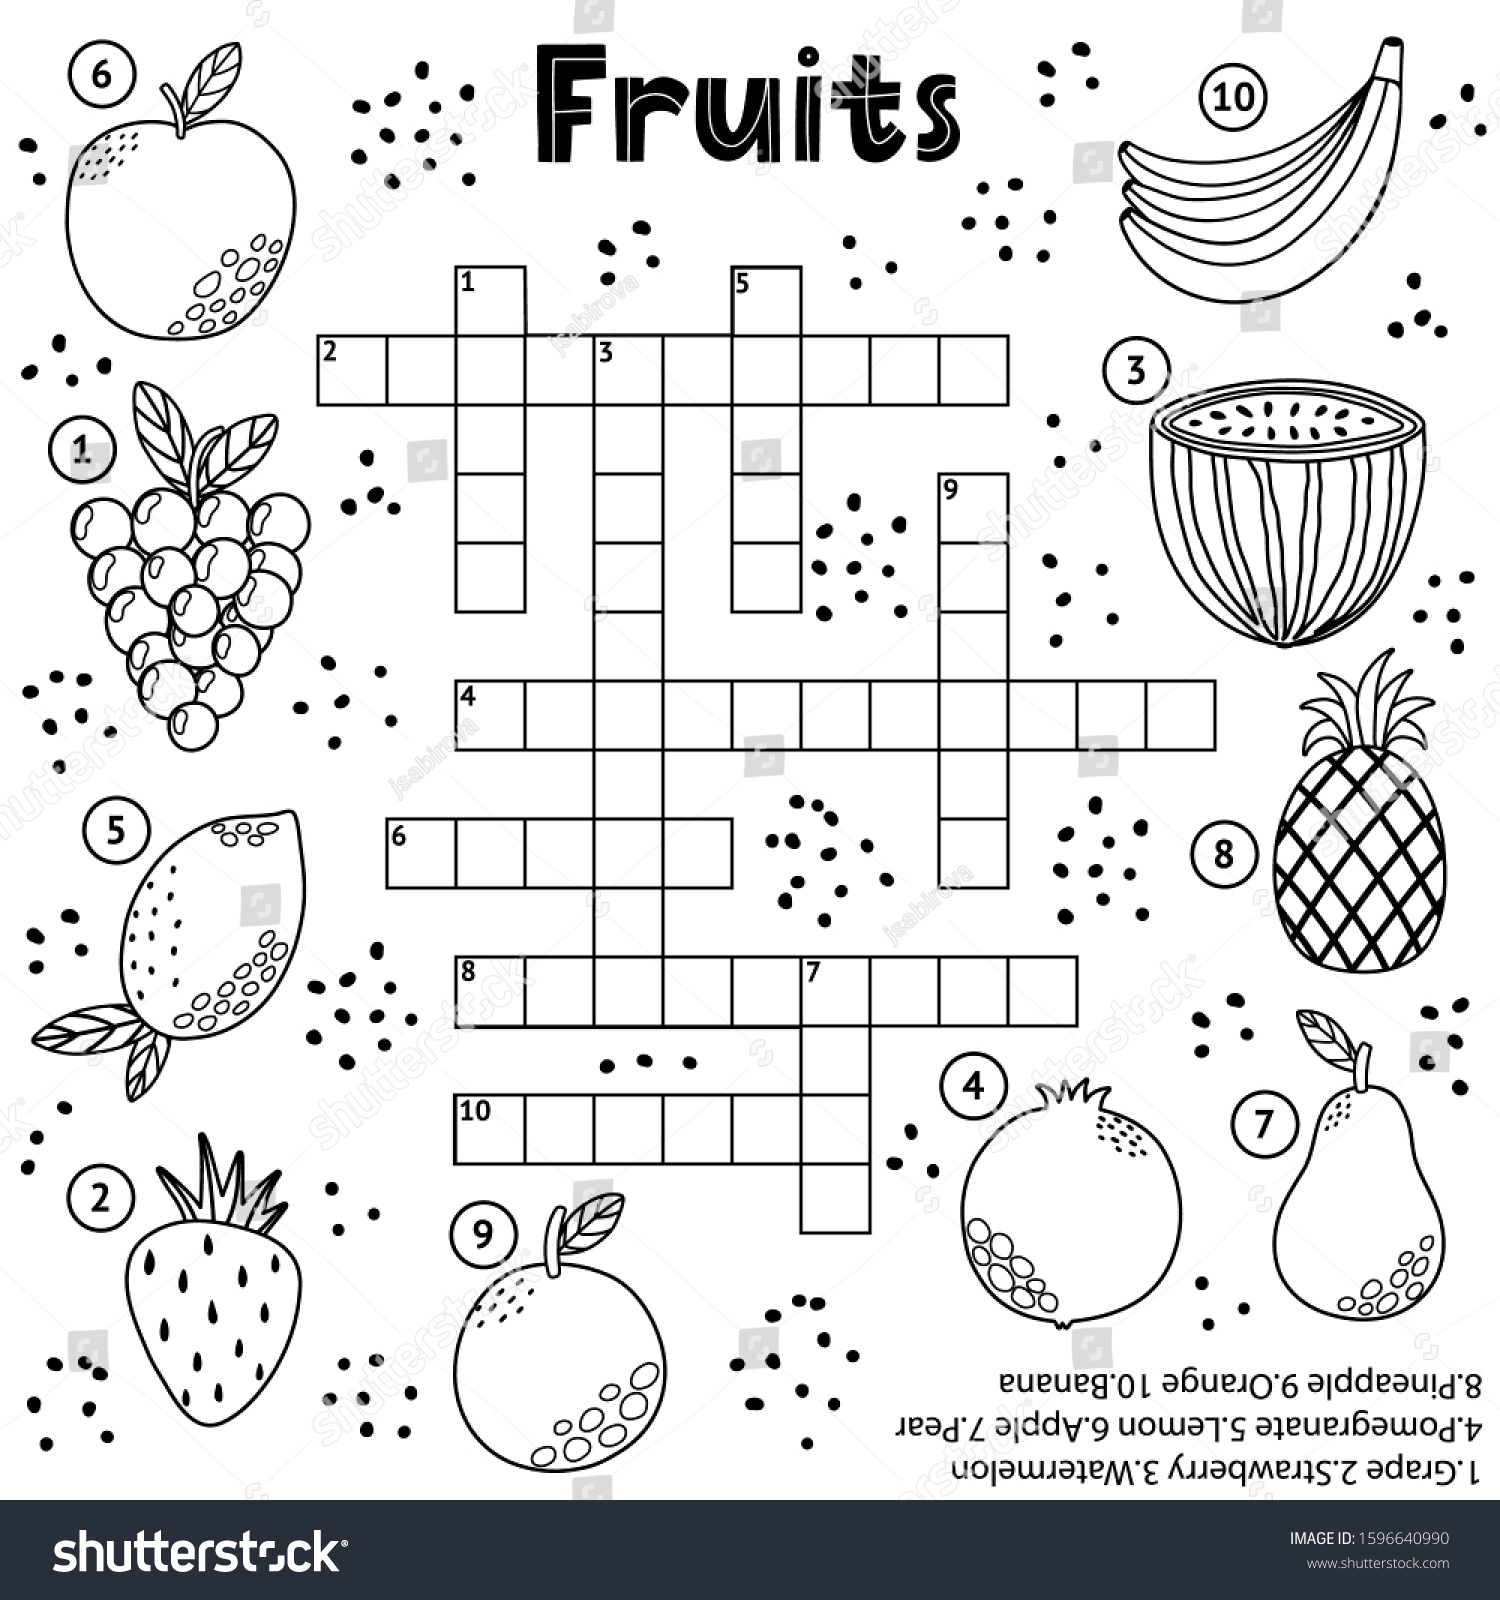 Black white crossword puzzle game fruits stock vector royalty free